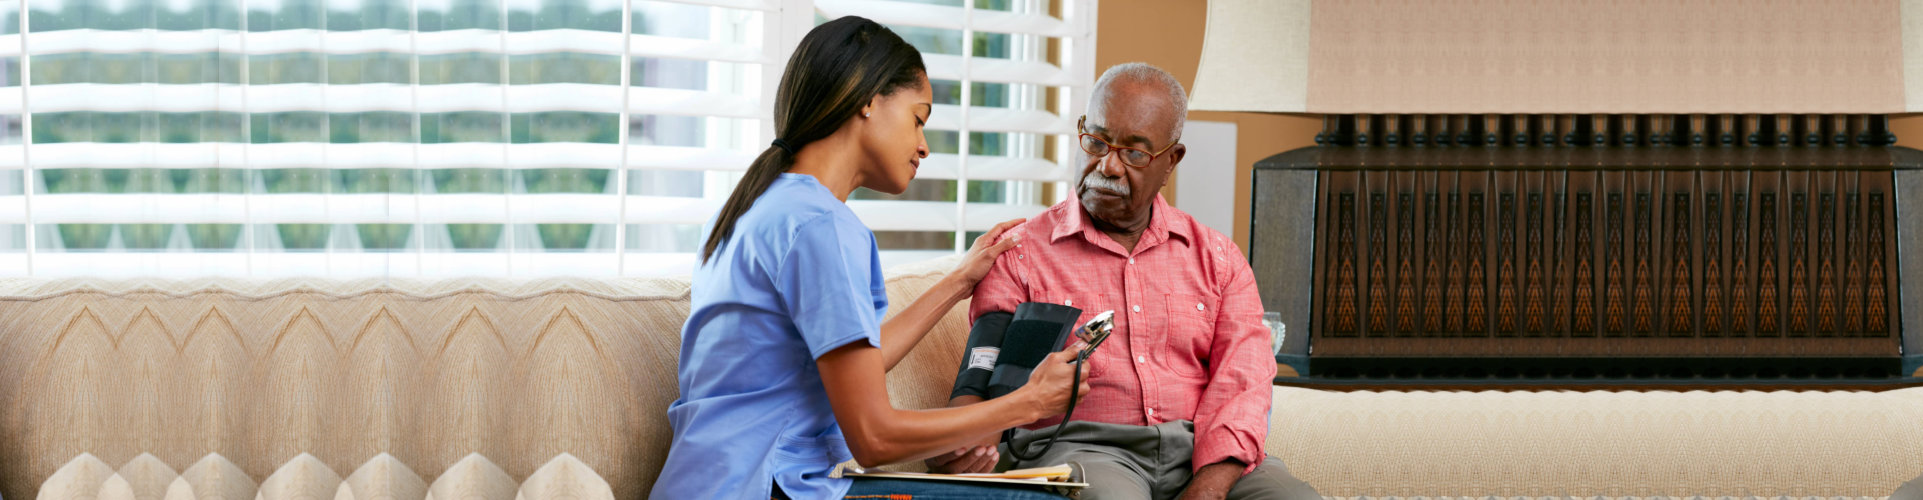 Nurse Visiting Senior Male Patient At Home Taking Notes